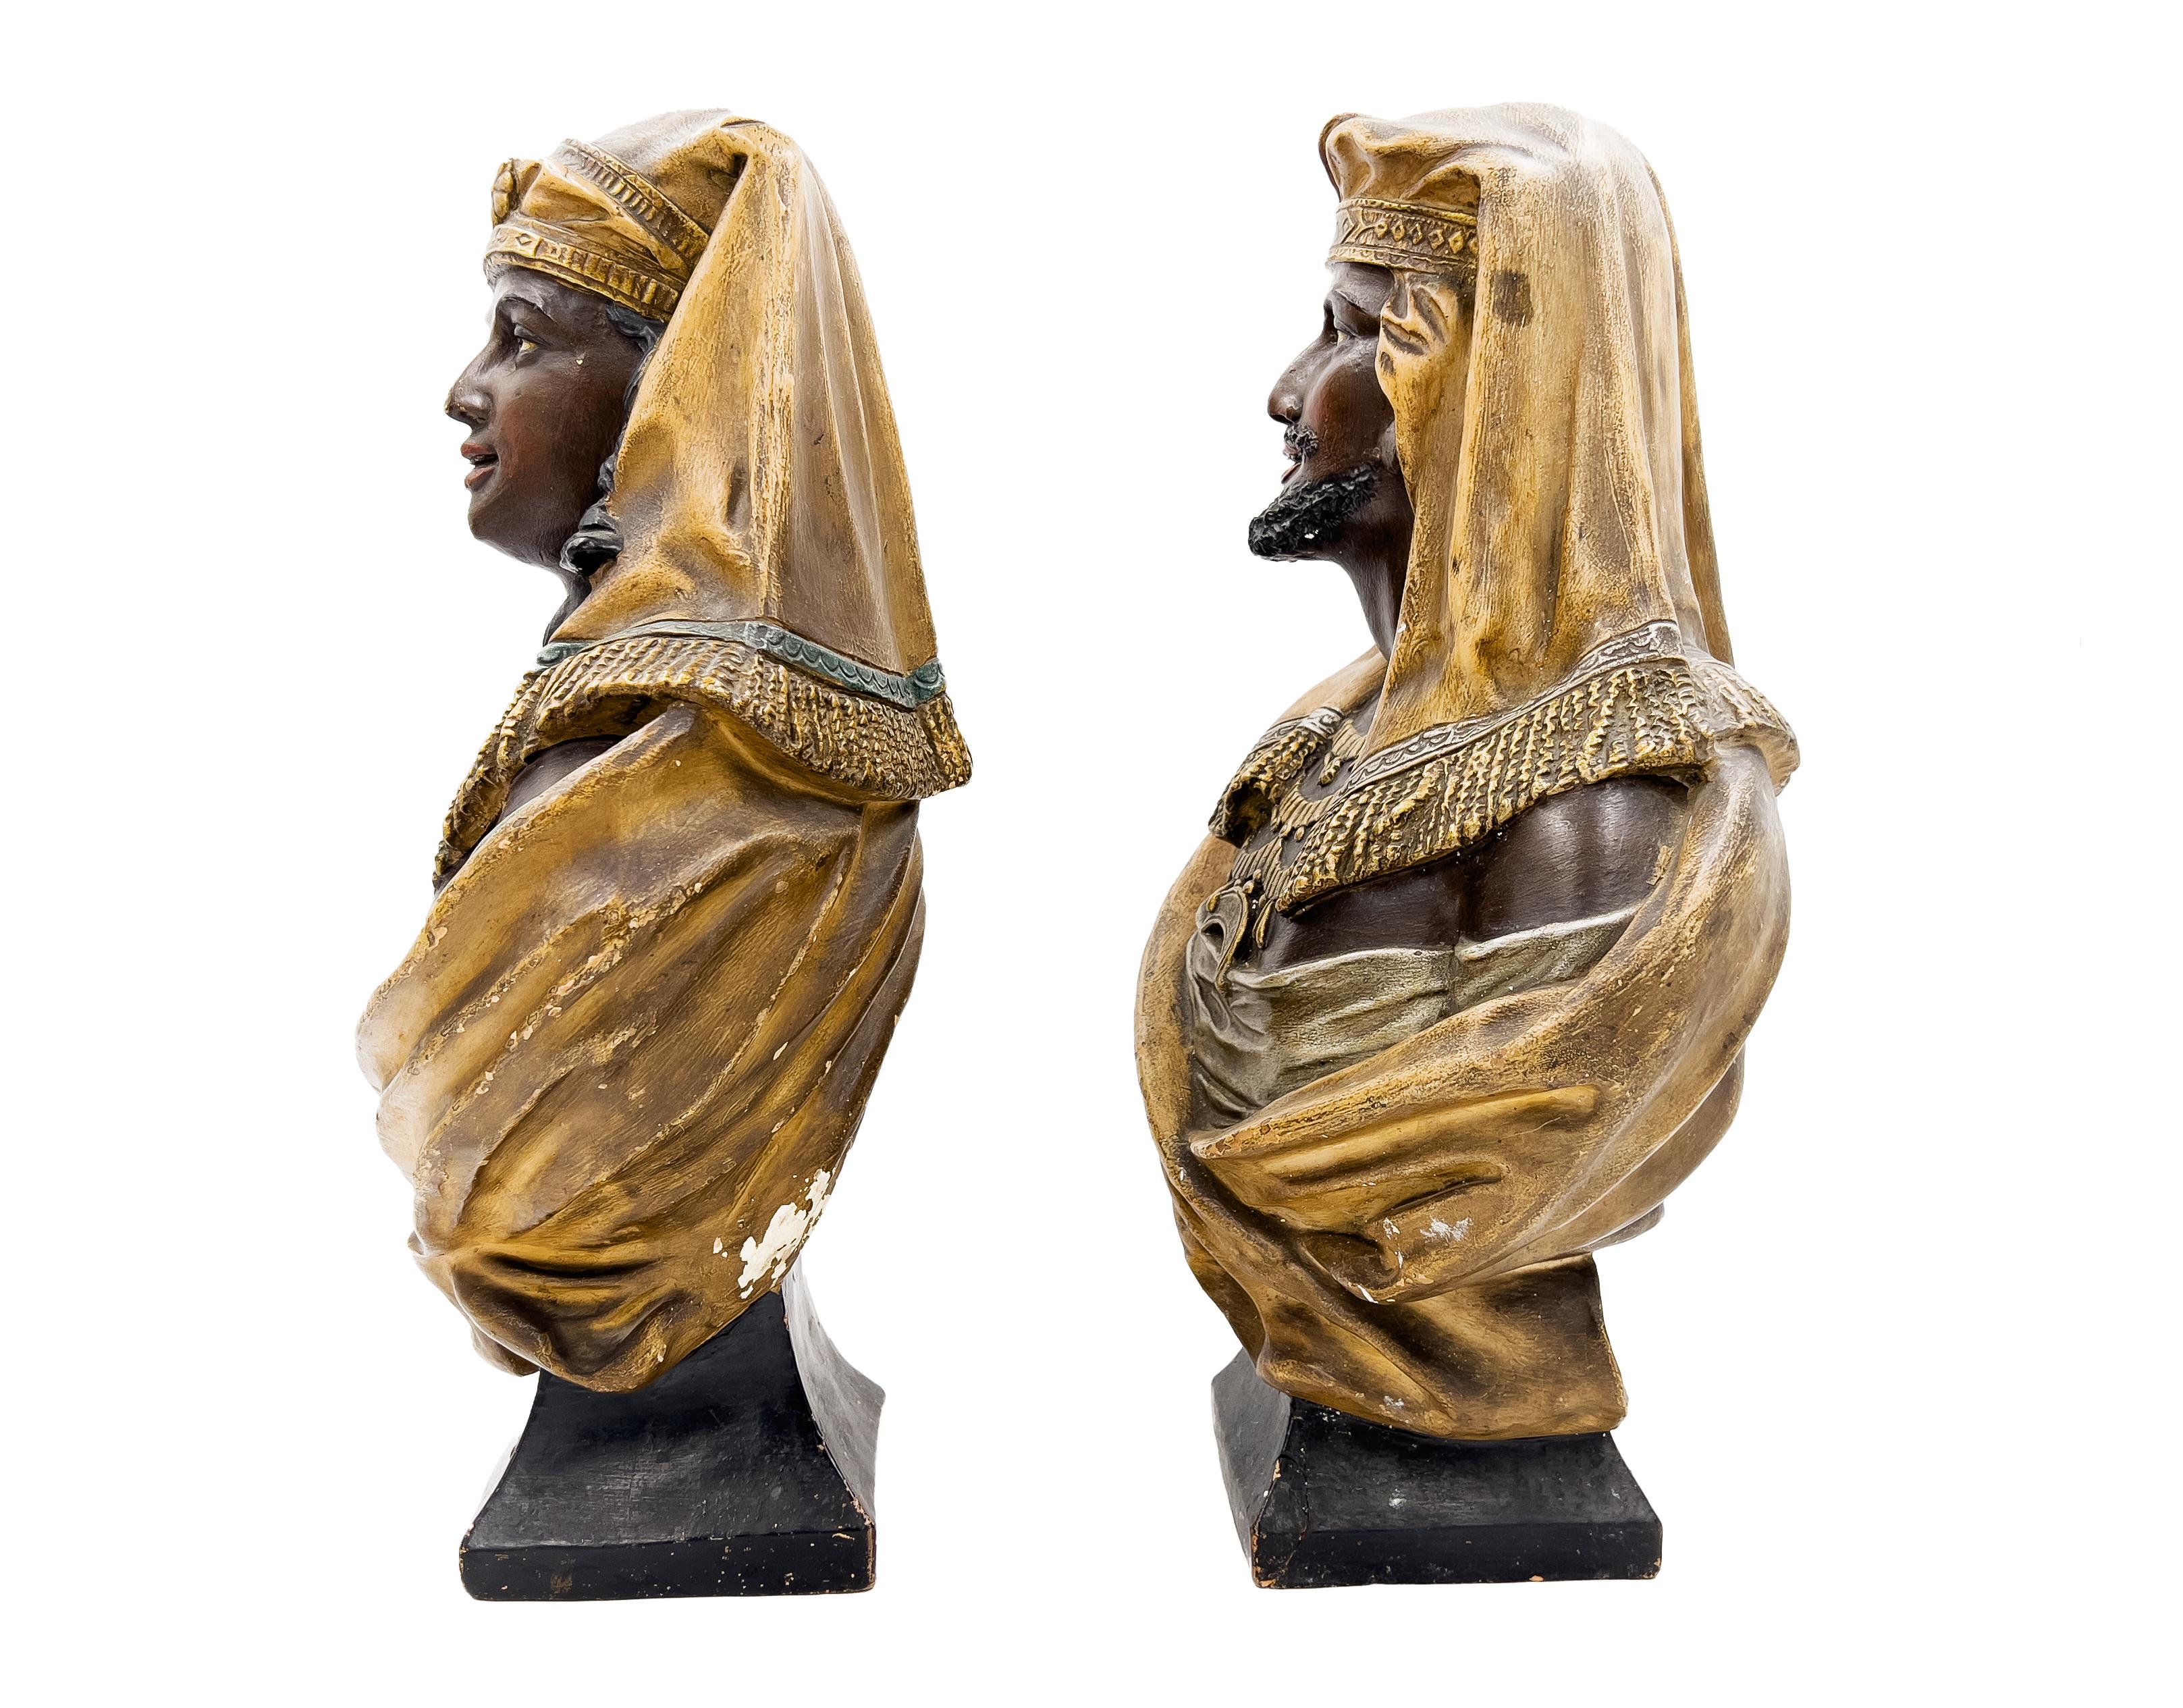 Pair of late 19th century Terracotta Busts featuring Orientalist figures, both busts wearing a headscarf and a necklace.